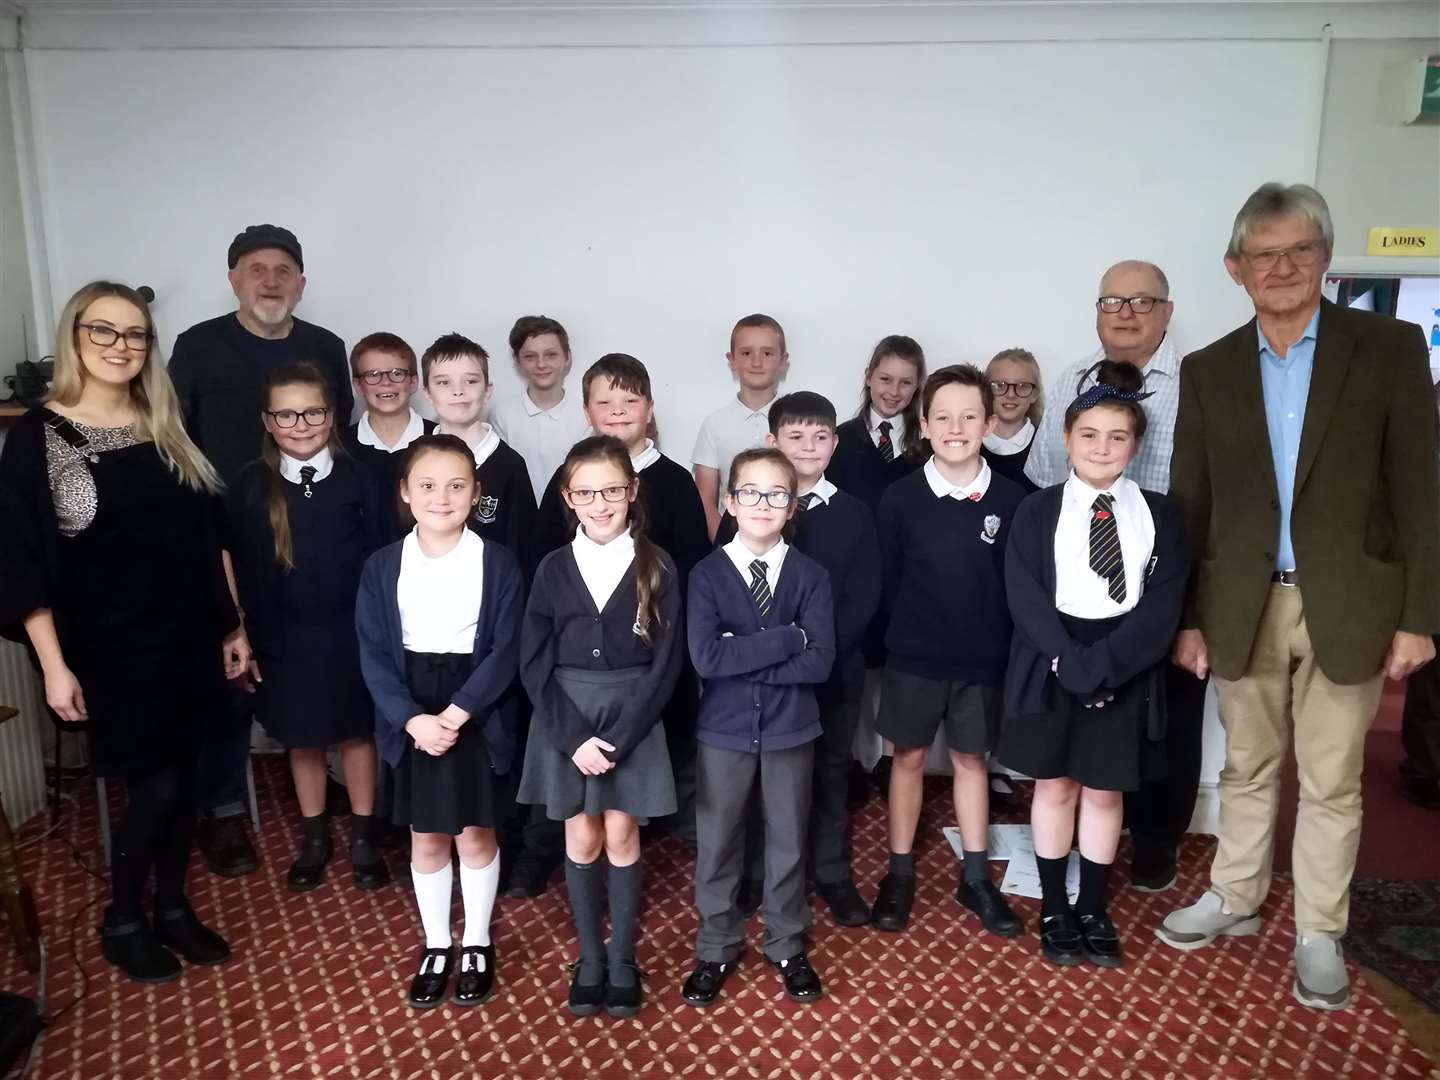 Warden House School Choir performing at the Deal at the Betteshanger Welfare Sports and Social Club where we launched the book.The adults in the picture are (from left to right) Kelly Allsopp choir trainer, Martin Riley author, Jim Davies BEM Miners Heritage and David Burridge composer.